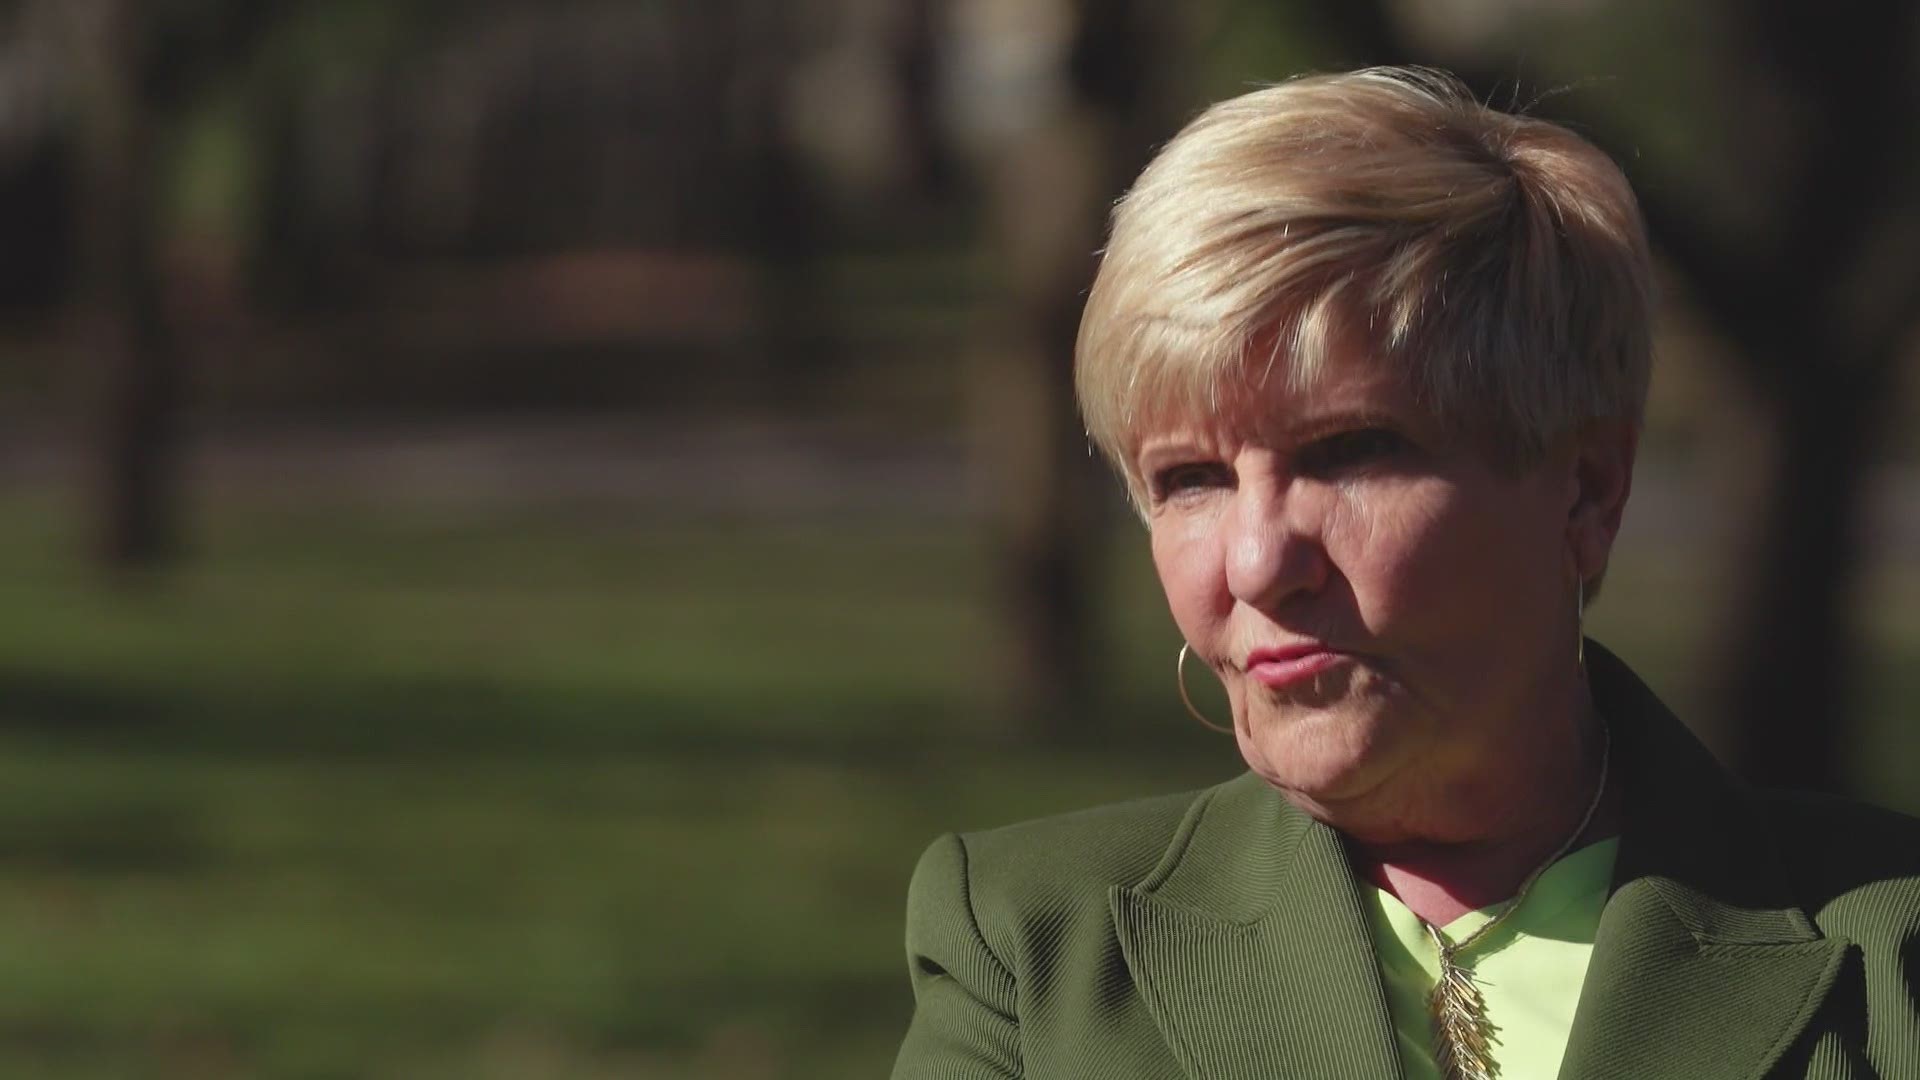 Price, 71, the city's longest-serving mayor, sat down for an interview with WFAA to talk about her time in office